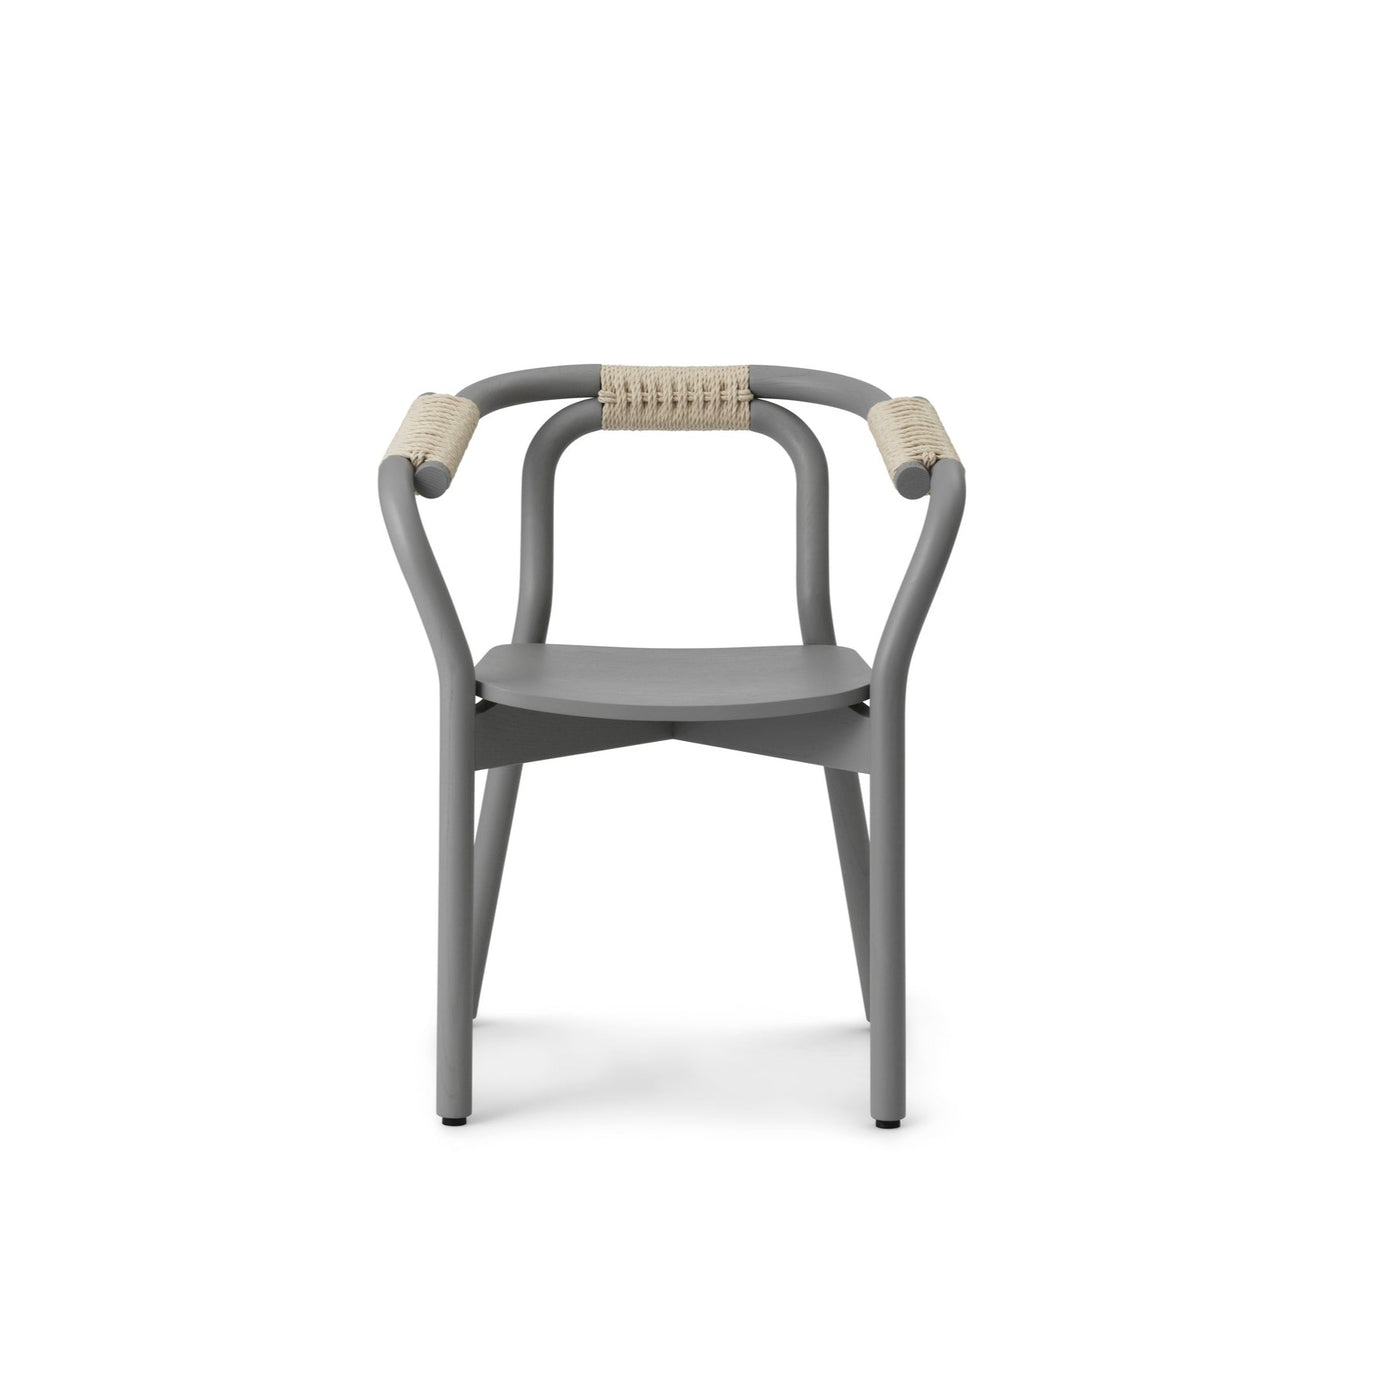 Normann Copenhagen Knot Chair at someday designs. #colour_grey-nature